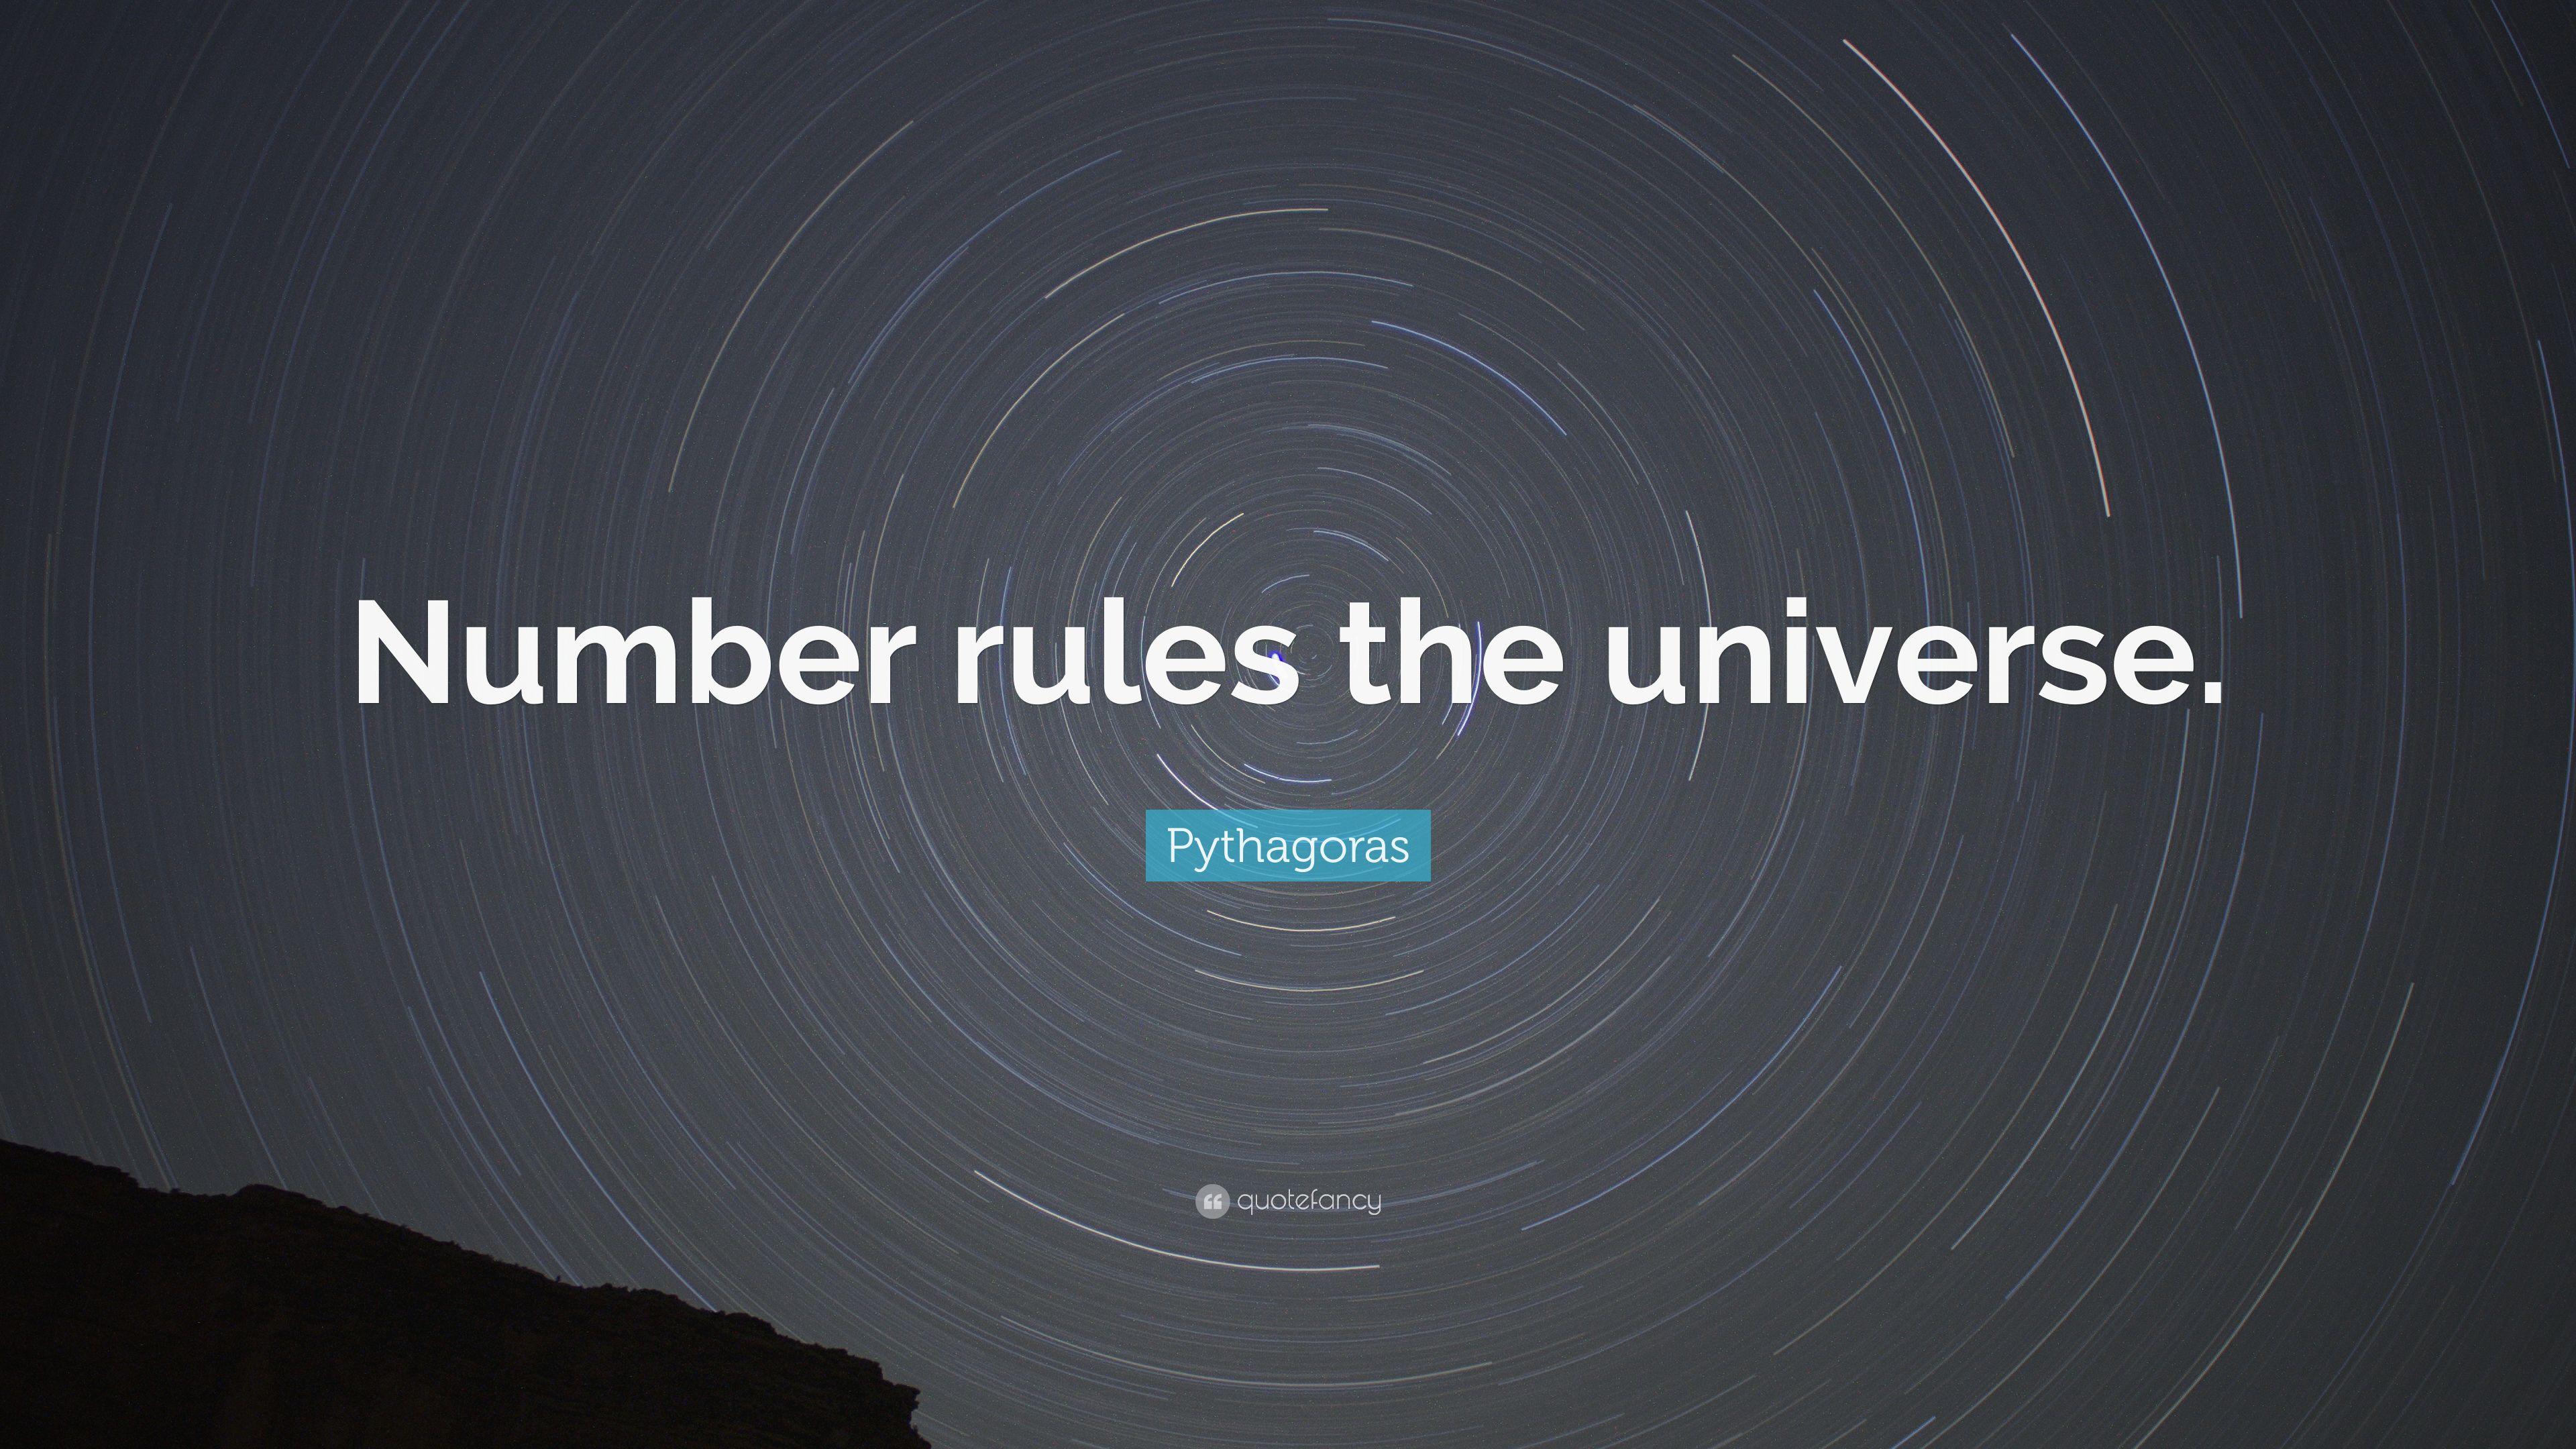 Pythagoras Quote: “Number rules the universe.” 12 wallpaper